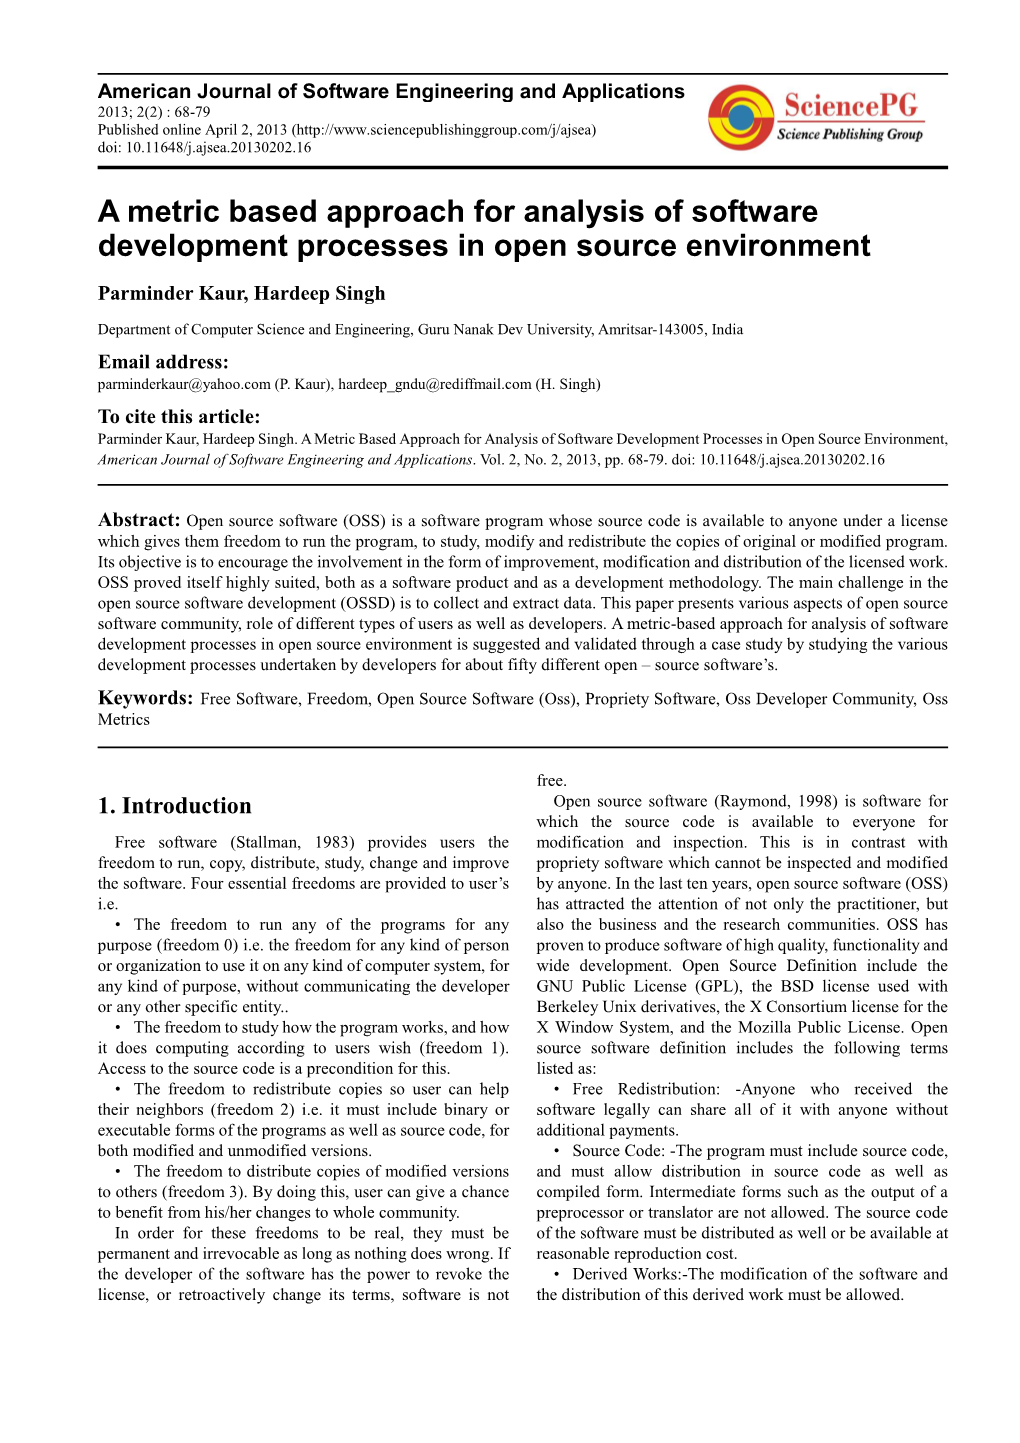 A Metric Based Approach for Analysis of Software Development Processes in Open Source Environment